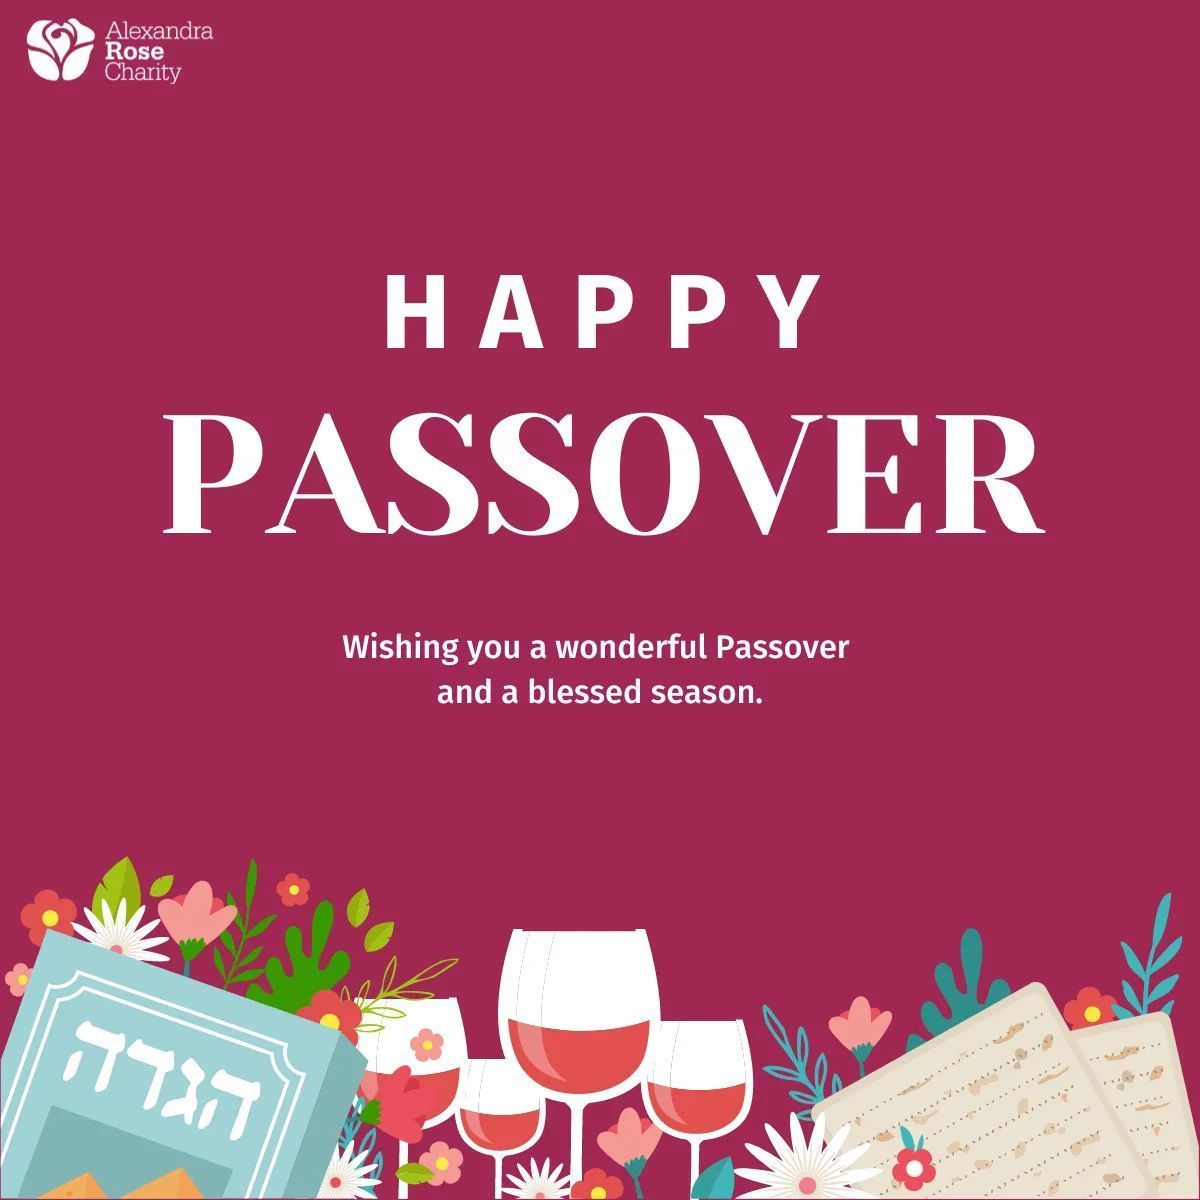 Chag Sameach! Wishing you all a happy, kosher and joyous Passover.